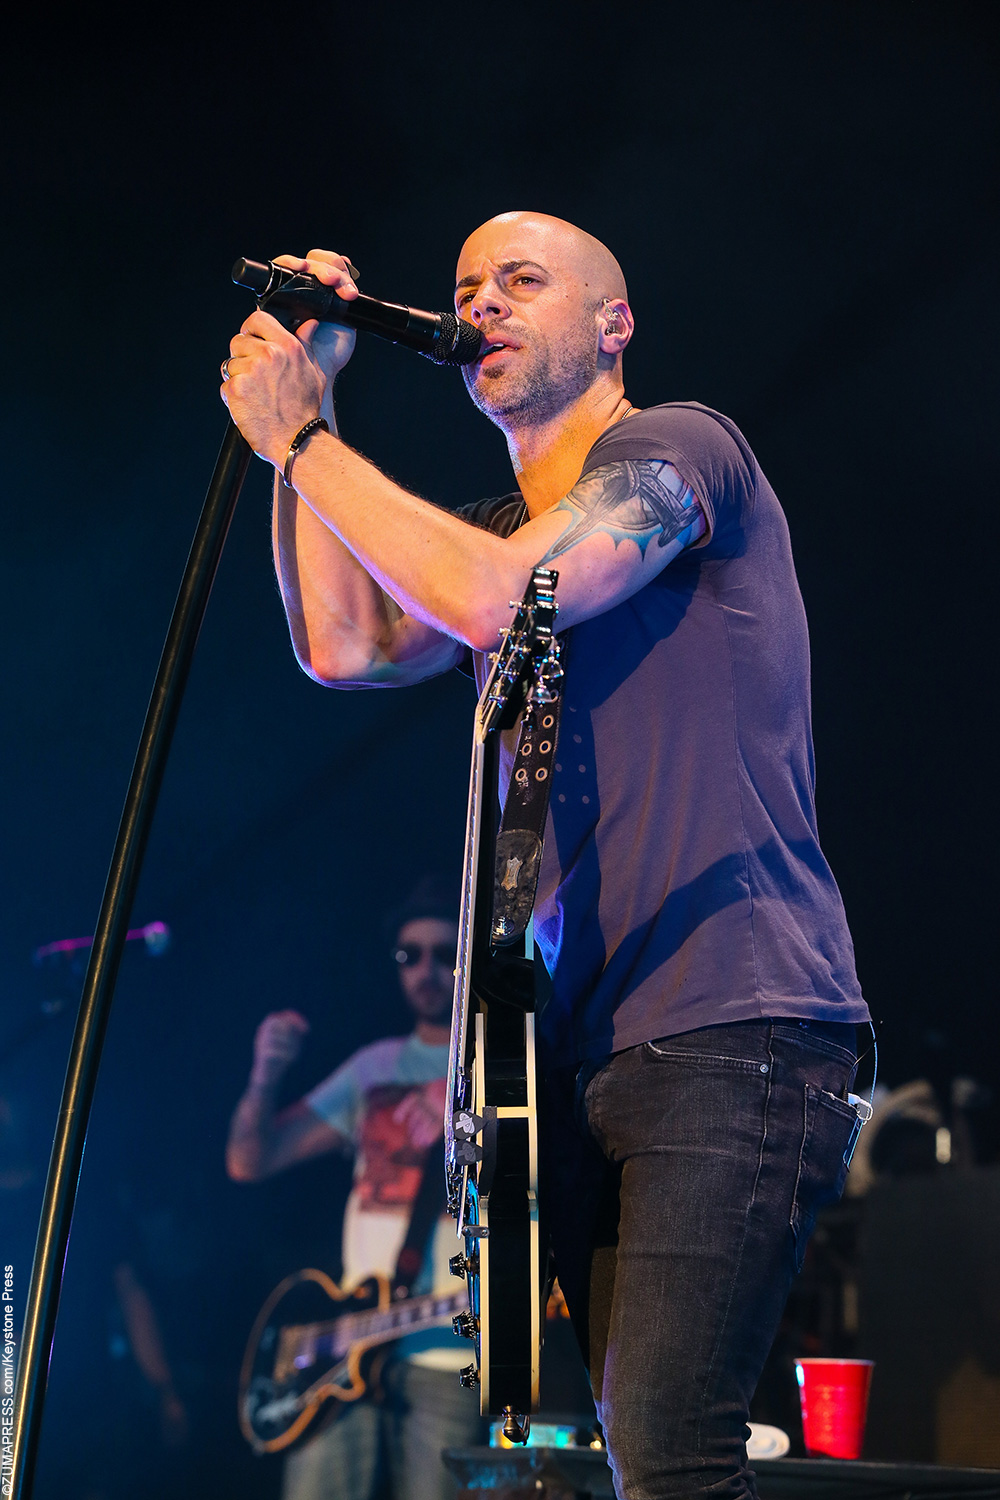 Chris Daughtry placed fourth in season four and has had a successful career as an artist ever since. Chris formed the band Daughtry after being eliminated from American Idol and their self-titled album was a fast success, selling more than one million copies in five weeks and reaching number one on the Billboard charts in its ninth […]